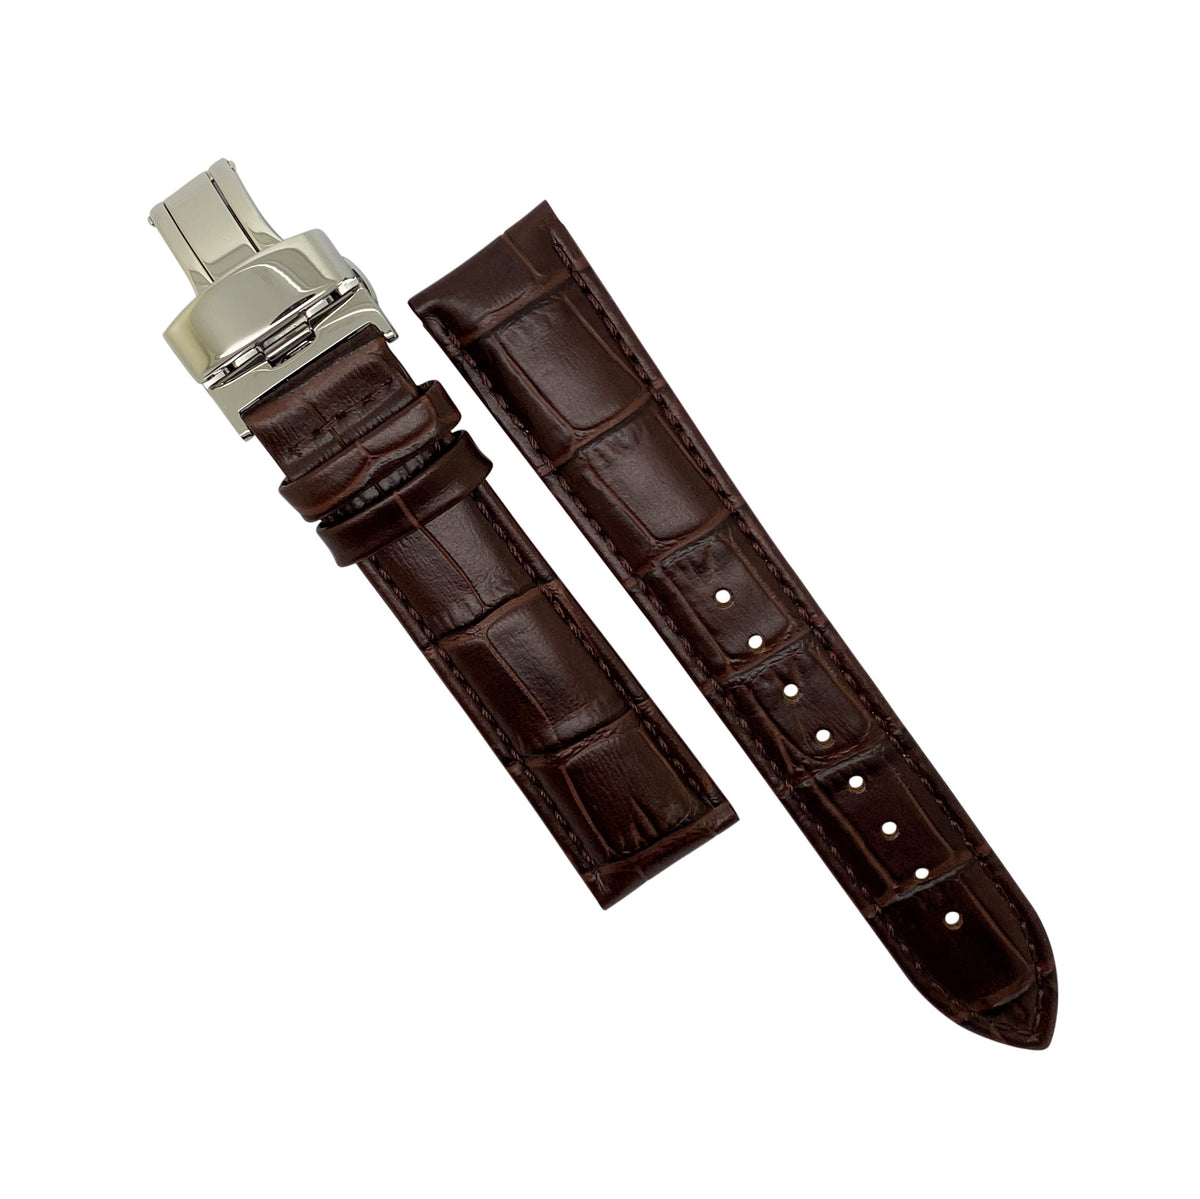 Genuine Croc Pattern Leather Watch Strap in Brown w/ Butterfly Clasp (18mm) - Nomad watch Works